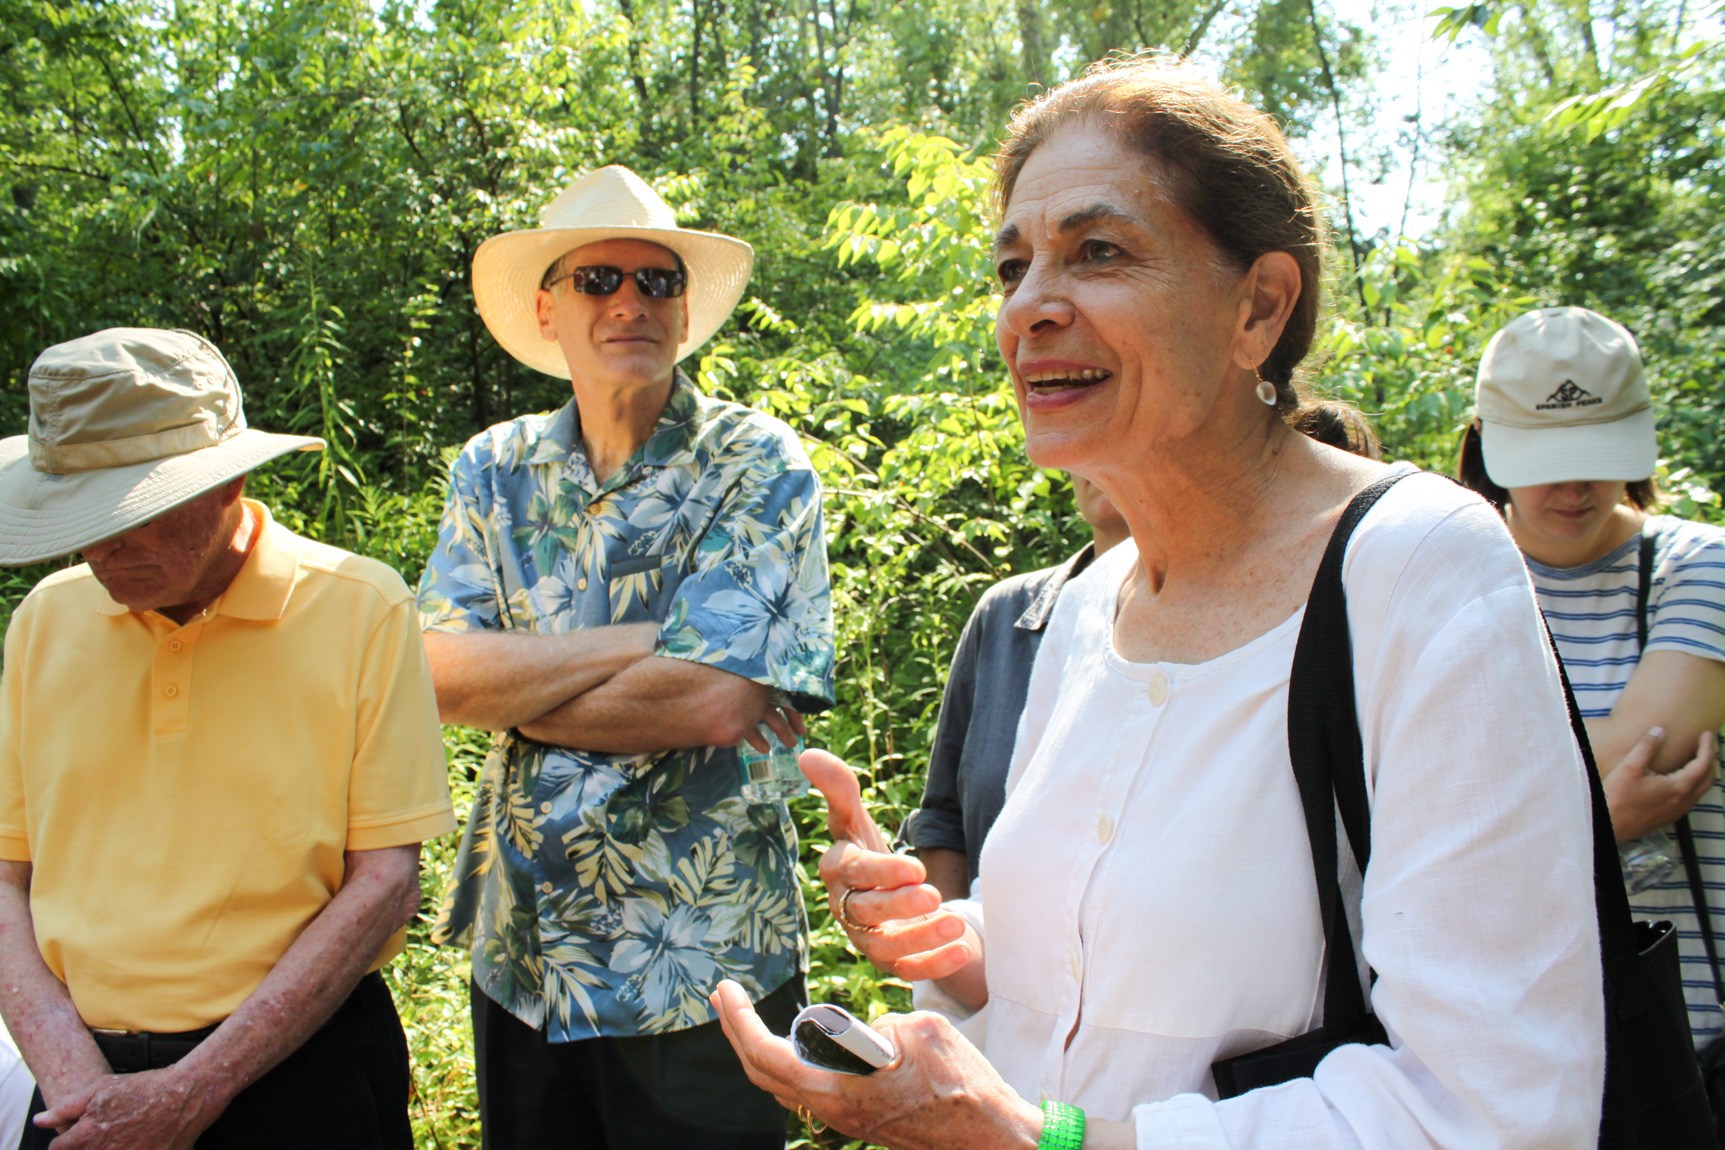 A person shares their thoughts to a group in a forested area.